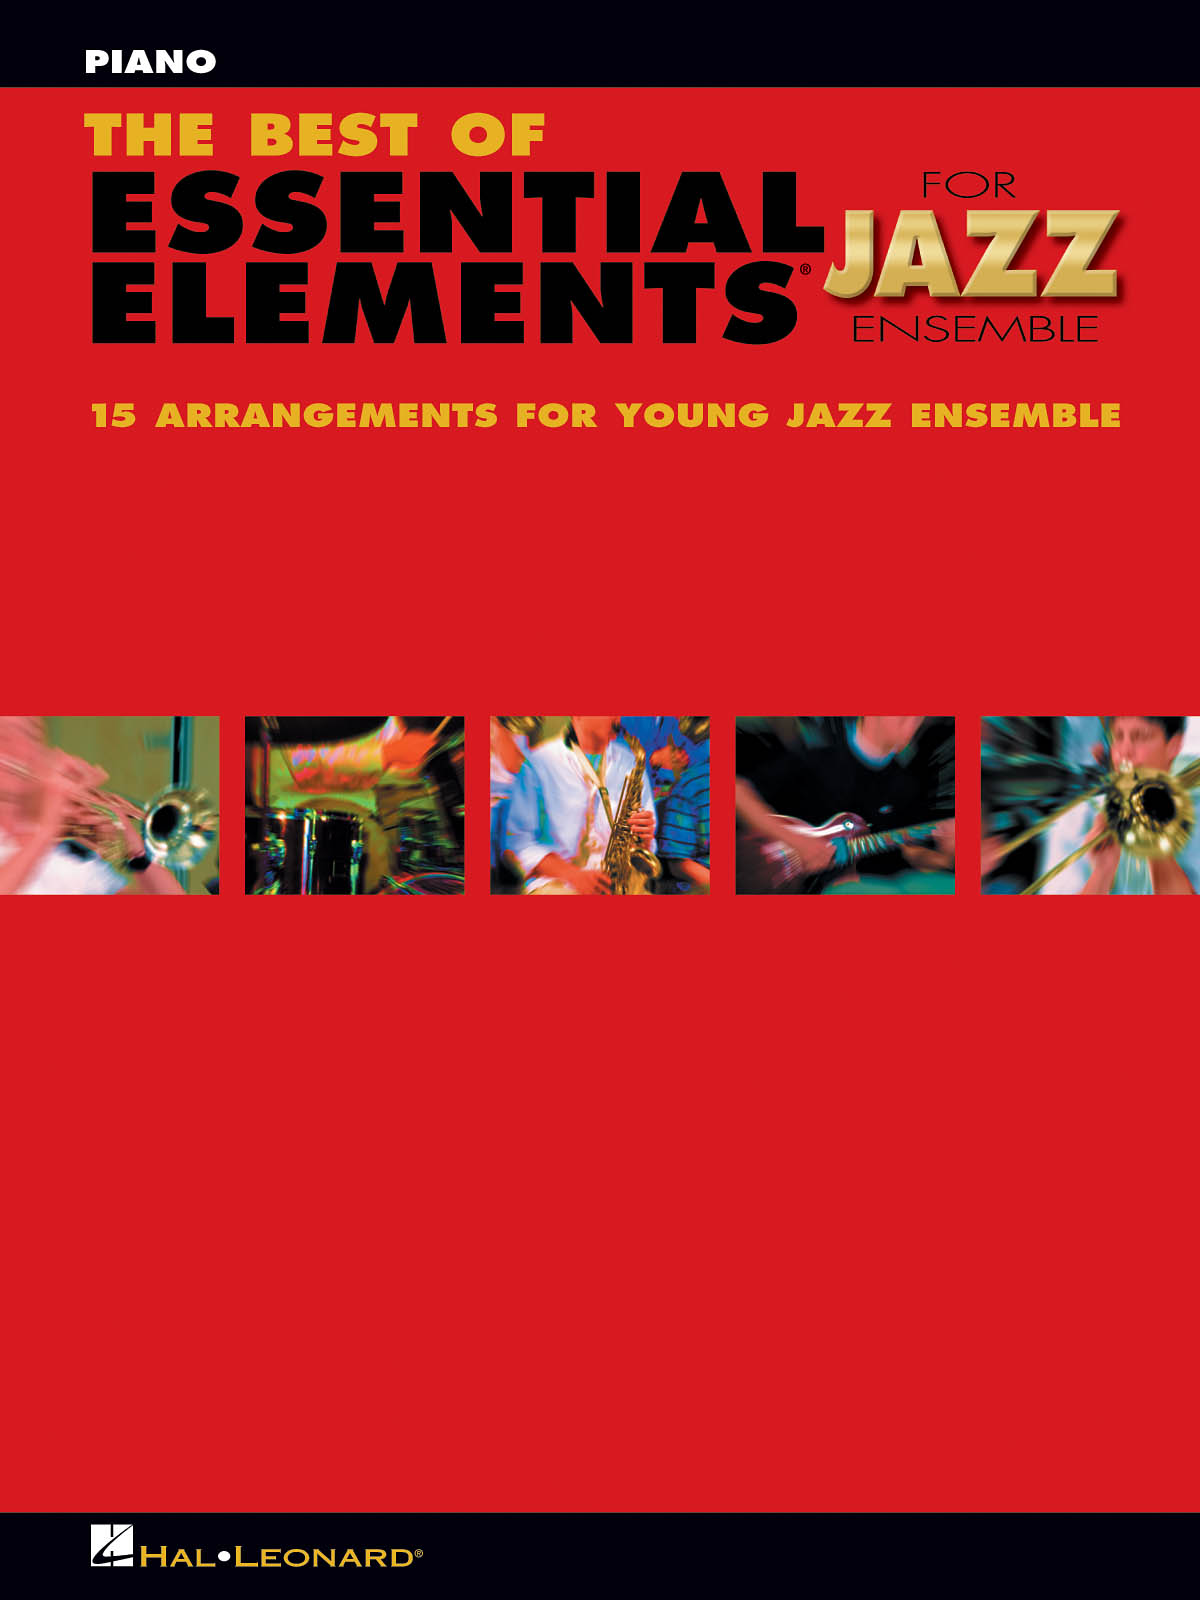 The Best Of Essential Elements For Jazz Ensemble (Piano)